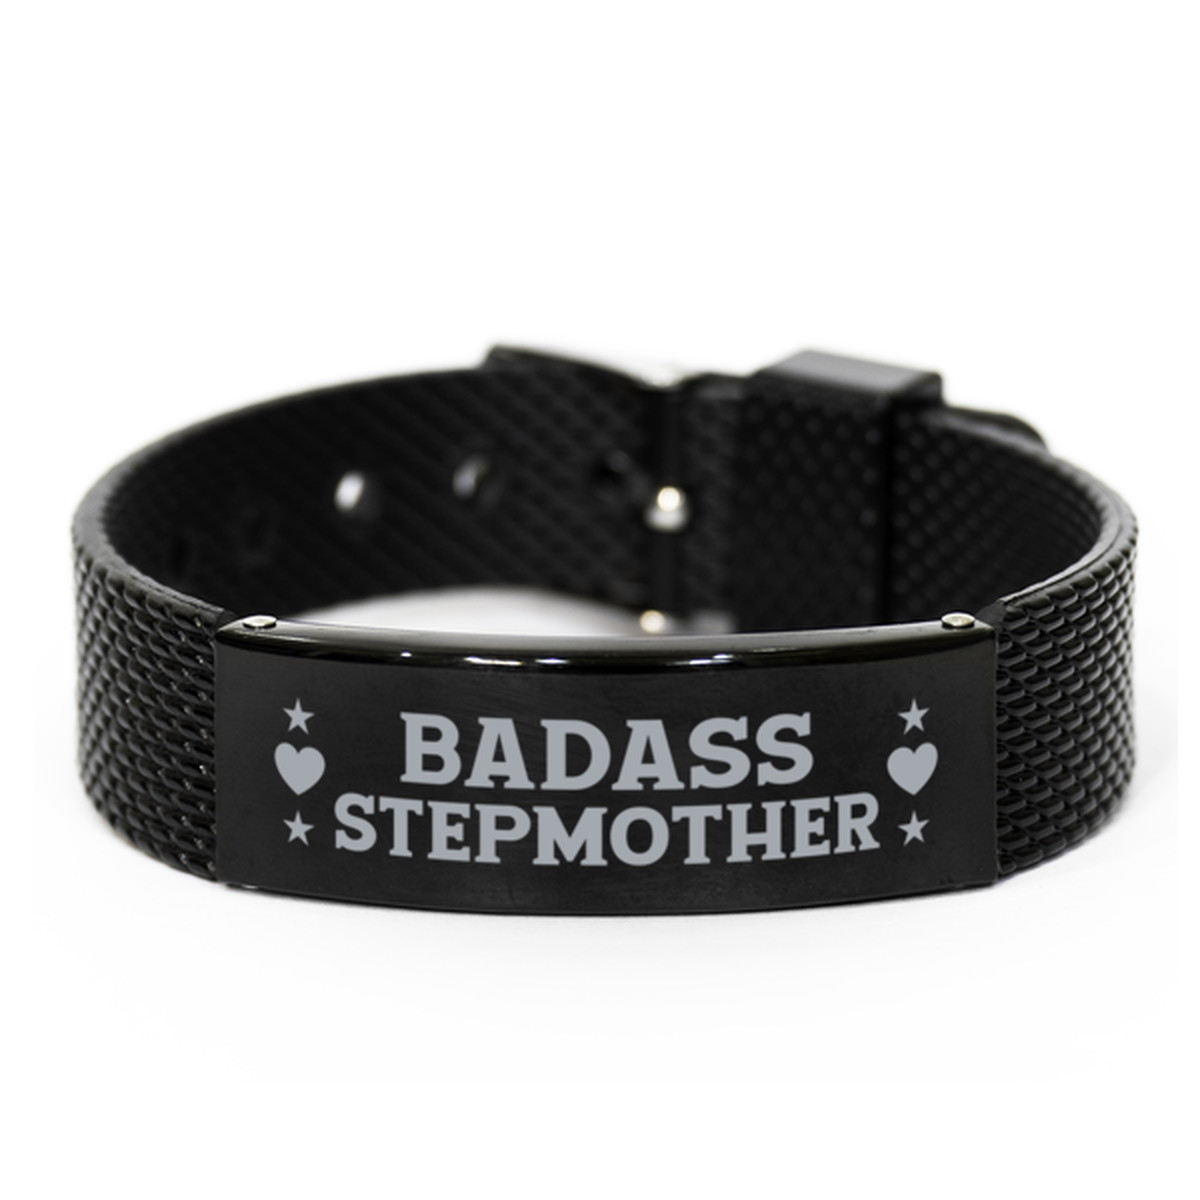 Stepmother Black Shark Mesh Bracelet, Badass Stepmother, Funny Family Gifts For Stepmother From Son Daughter